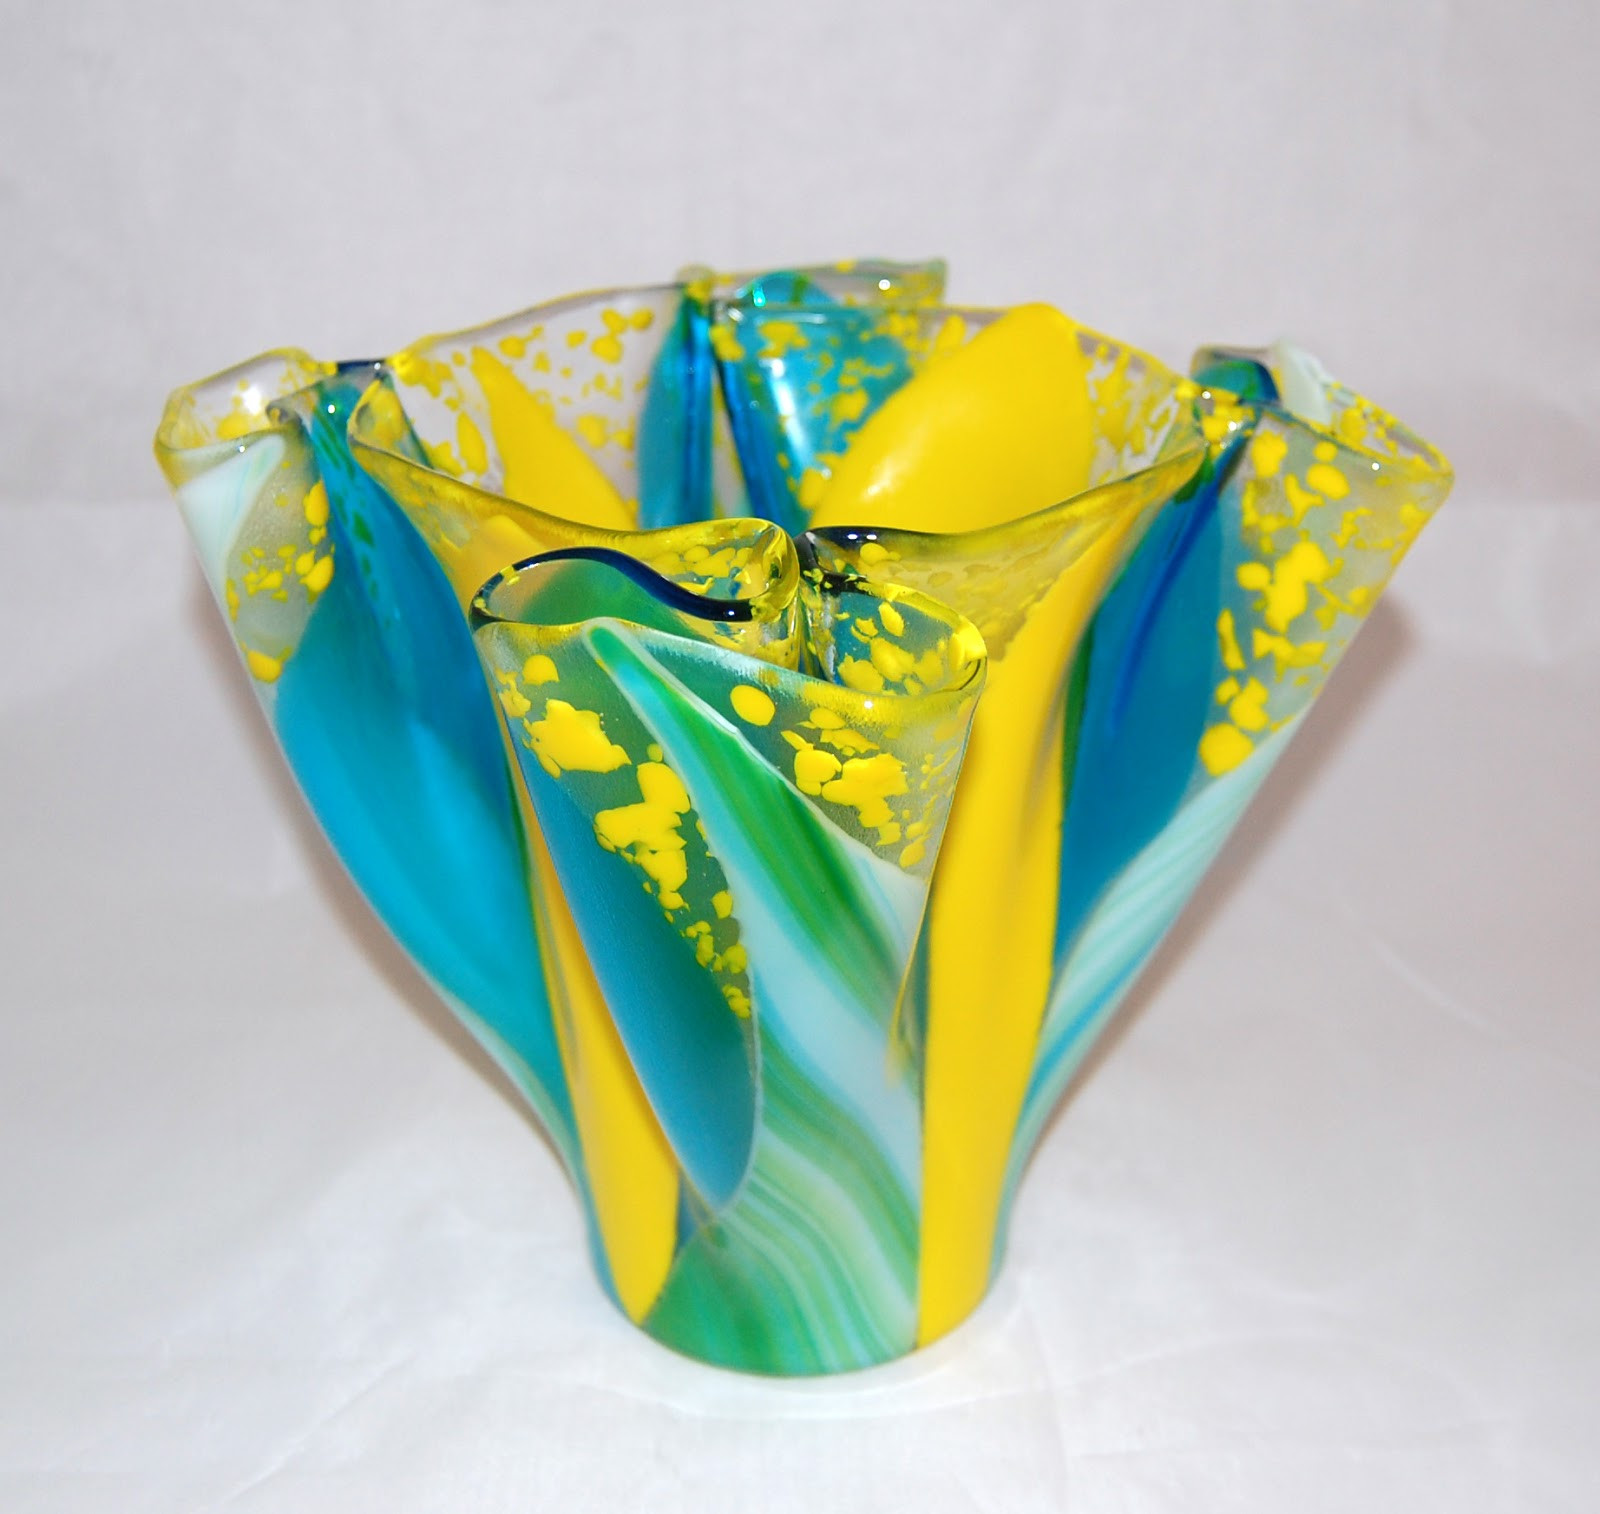 12 Perfect Heavy Blue Glass Vase 2024 free download heavy blue glass vase of dana worley fused glass designs in yellow blue and green fused glass vase